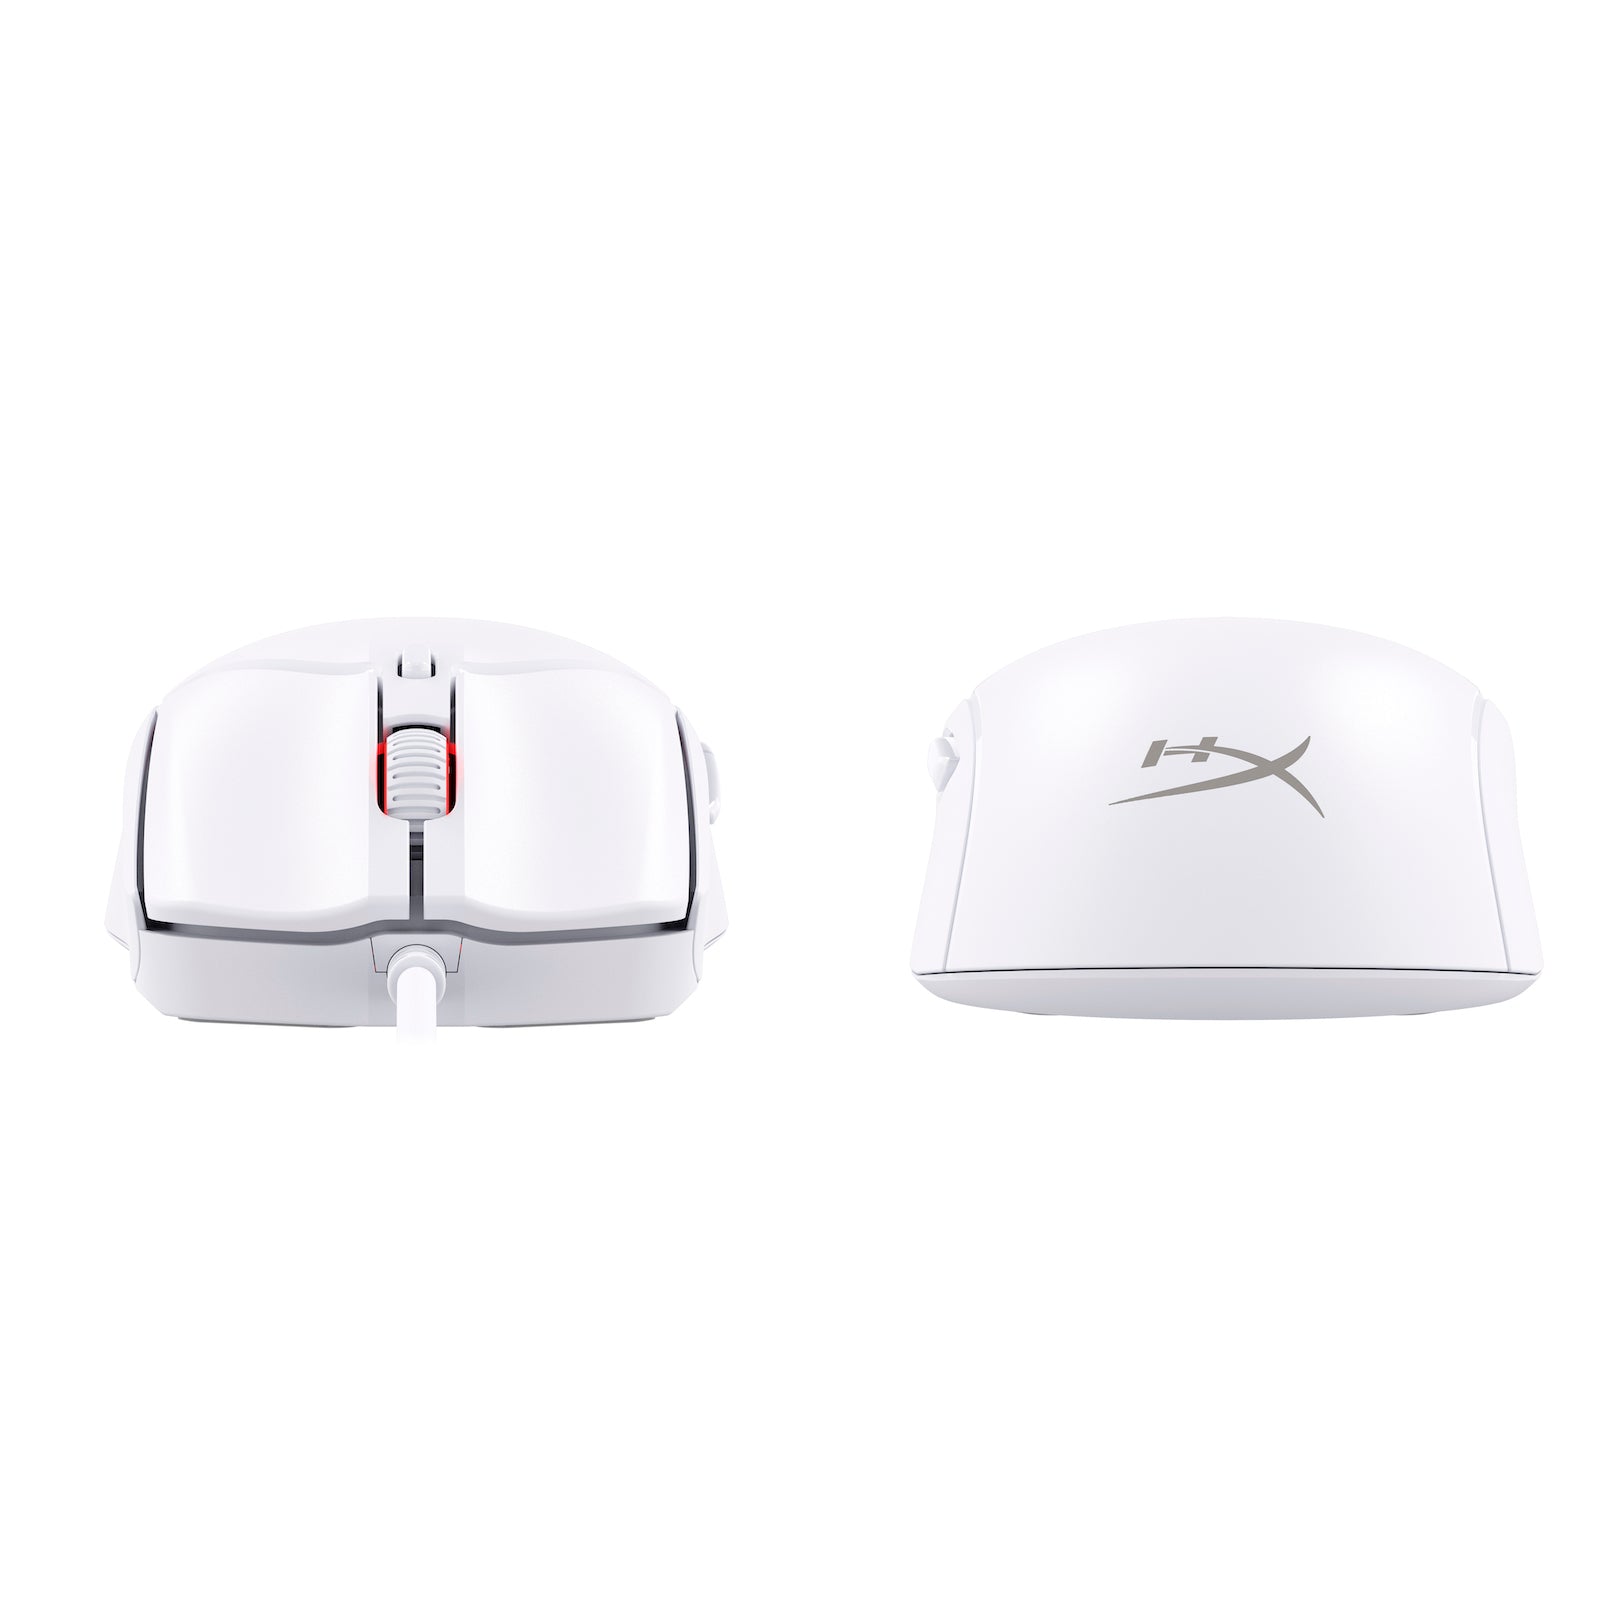 HyperX Pulsefire Haste 2 White Gaming Mouse Showing Both Front and Back Sides